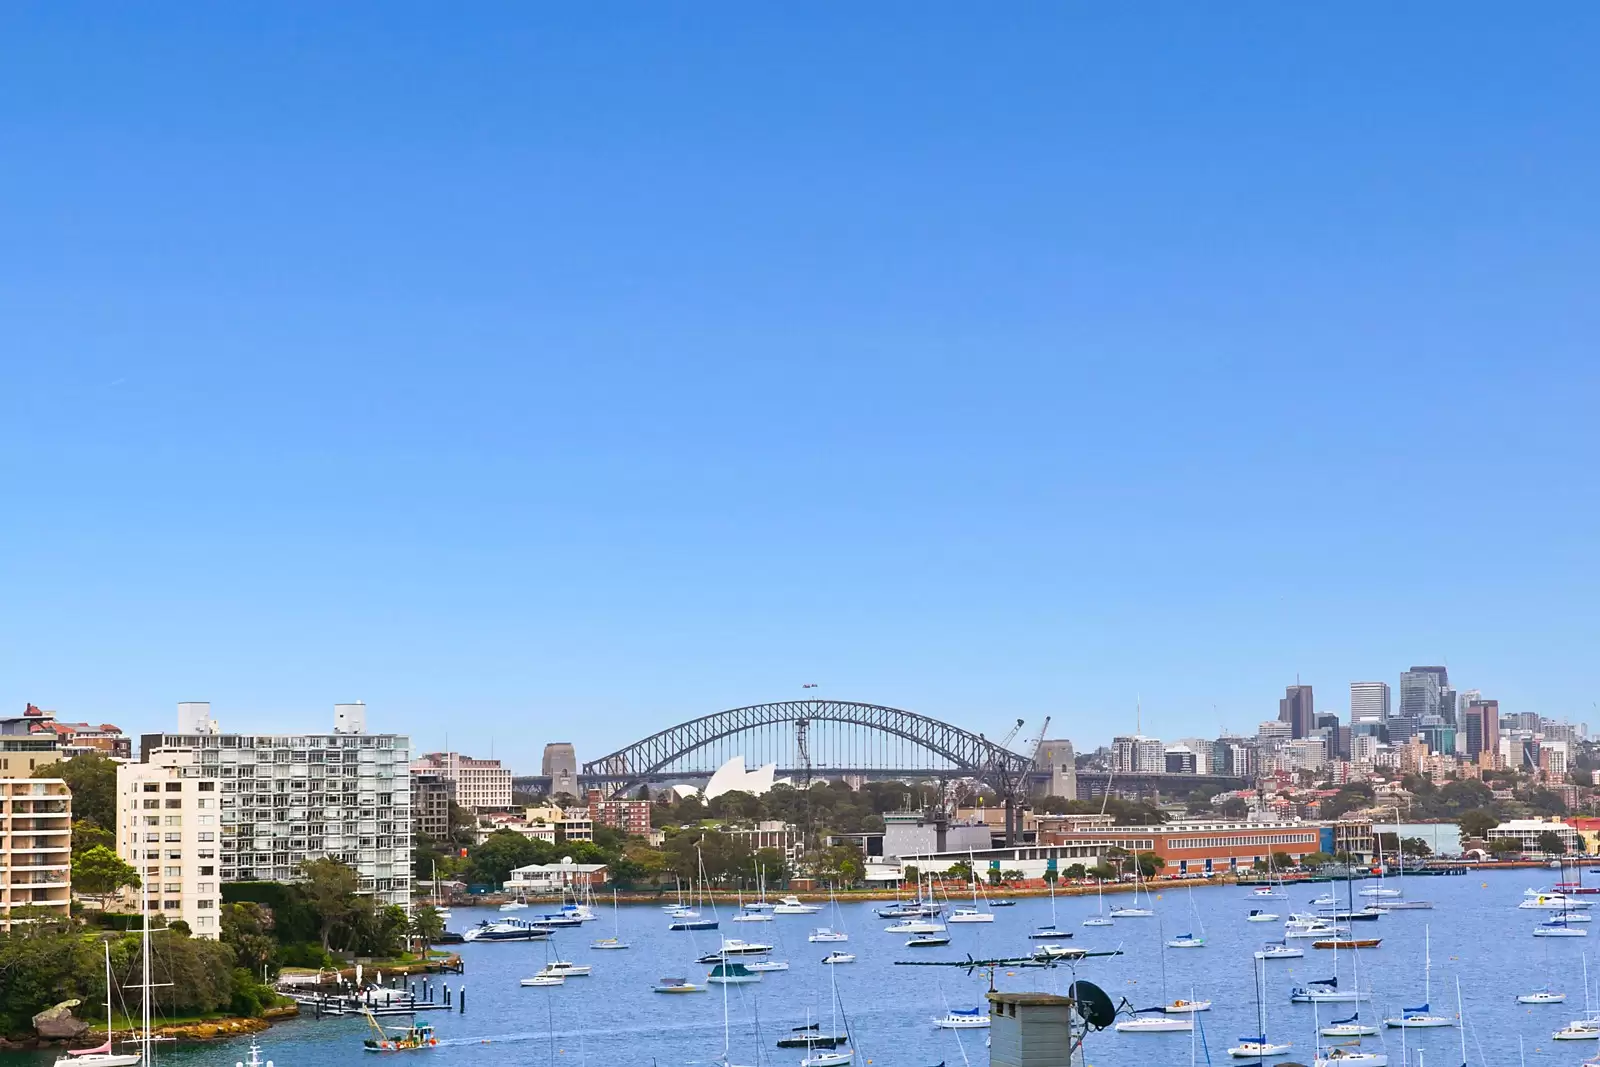 Photo #15: 4/3 Annandale Street, Darling Point - Sold by Sydney Sotheby's International Realty